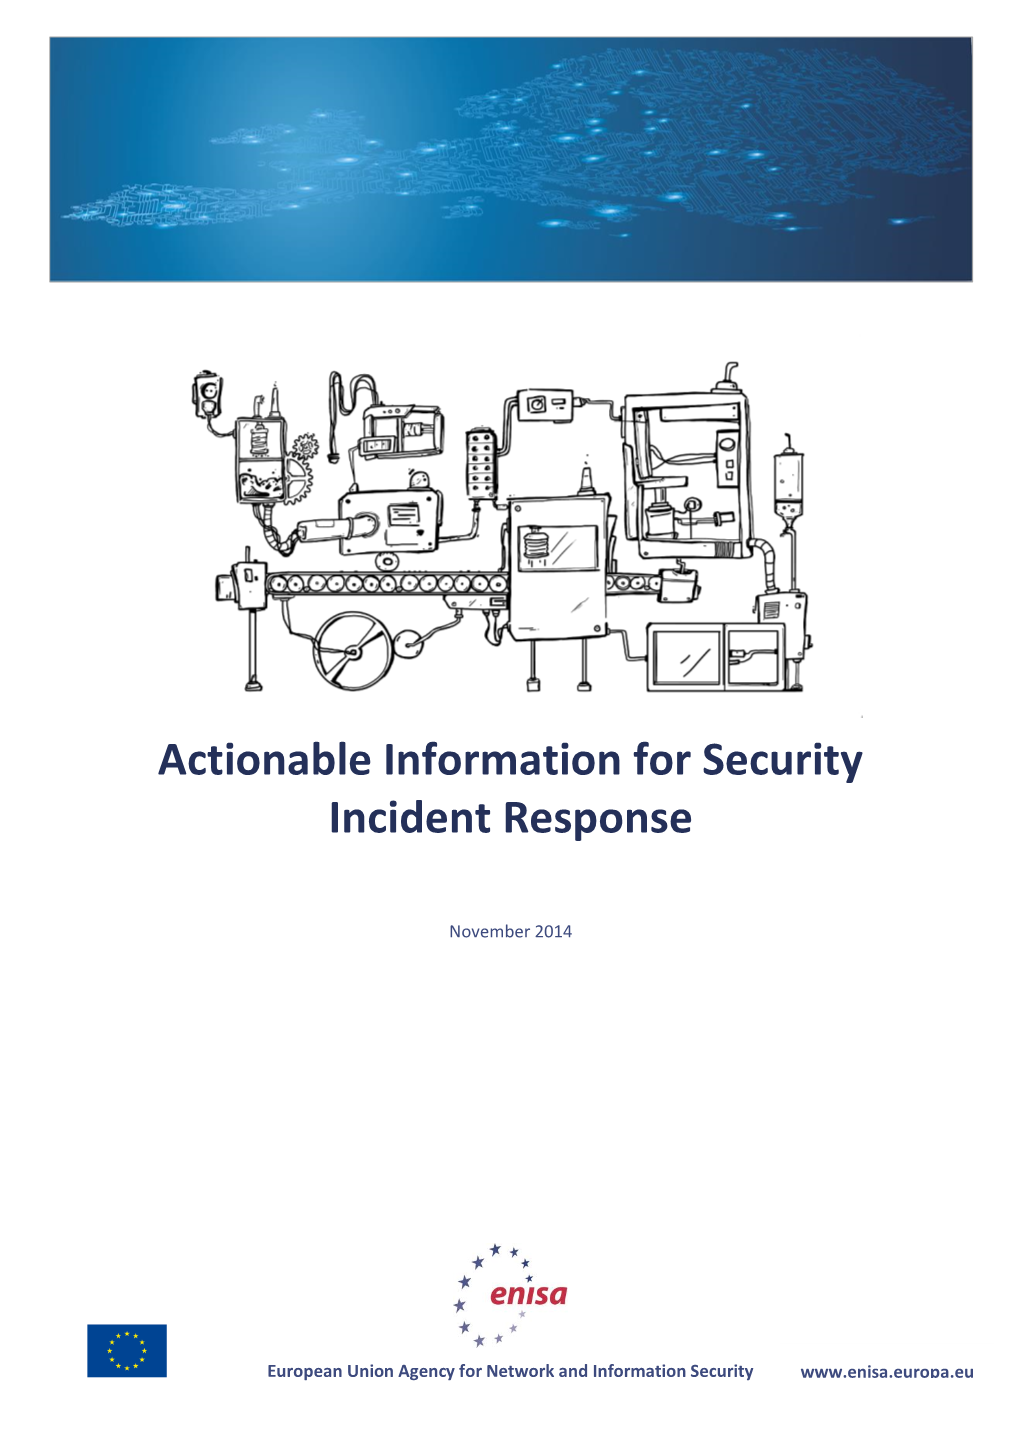 Actionable Information for Security Incident Response Study